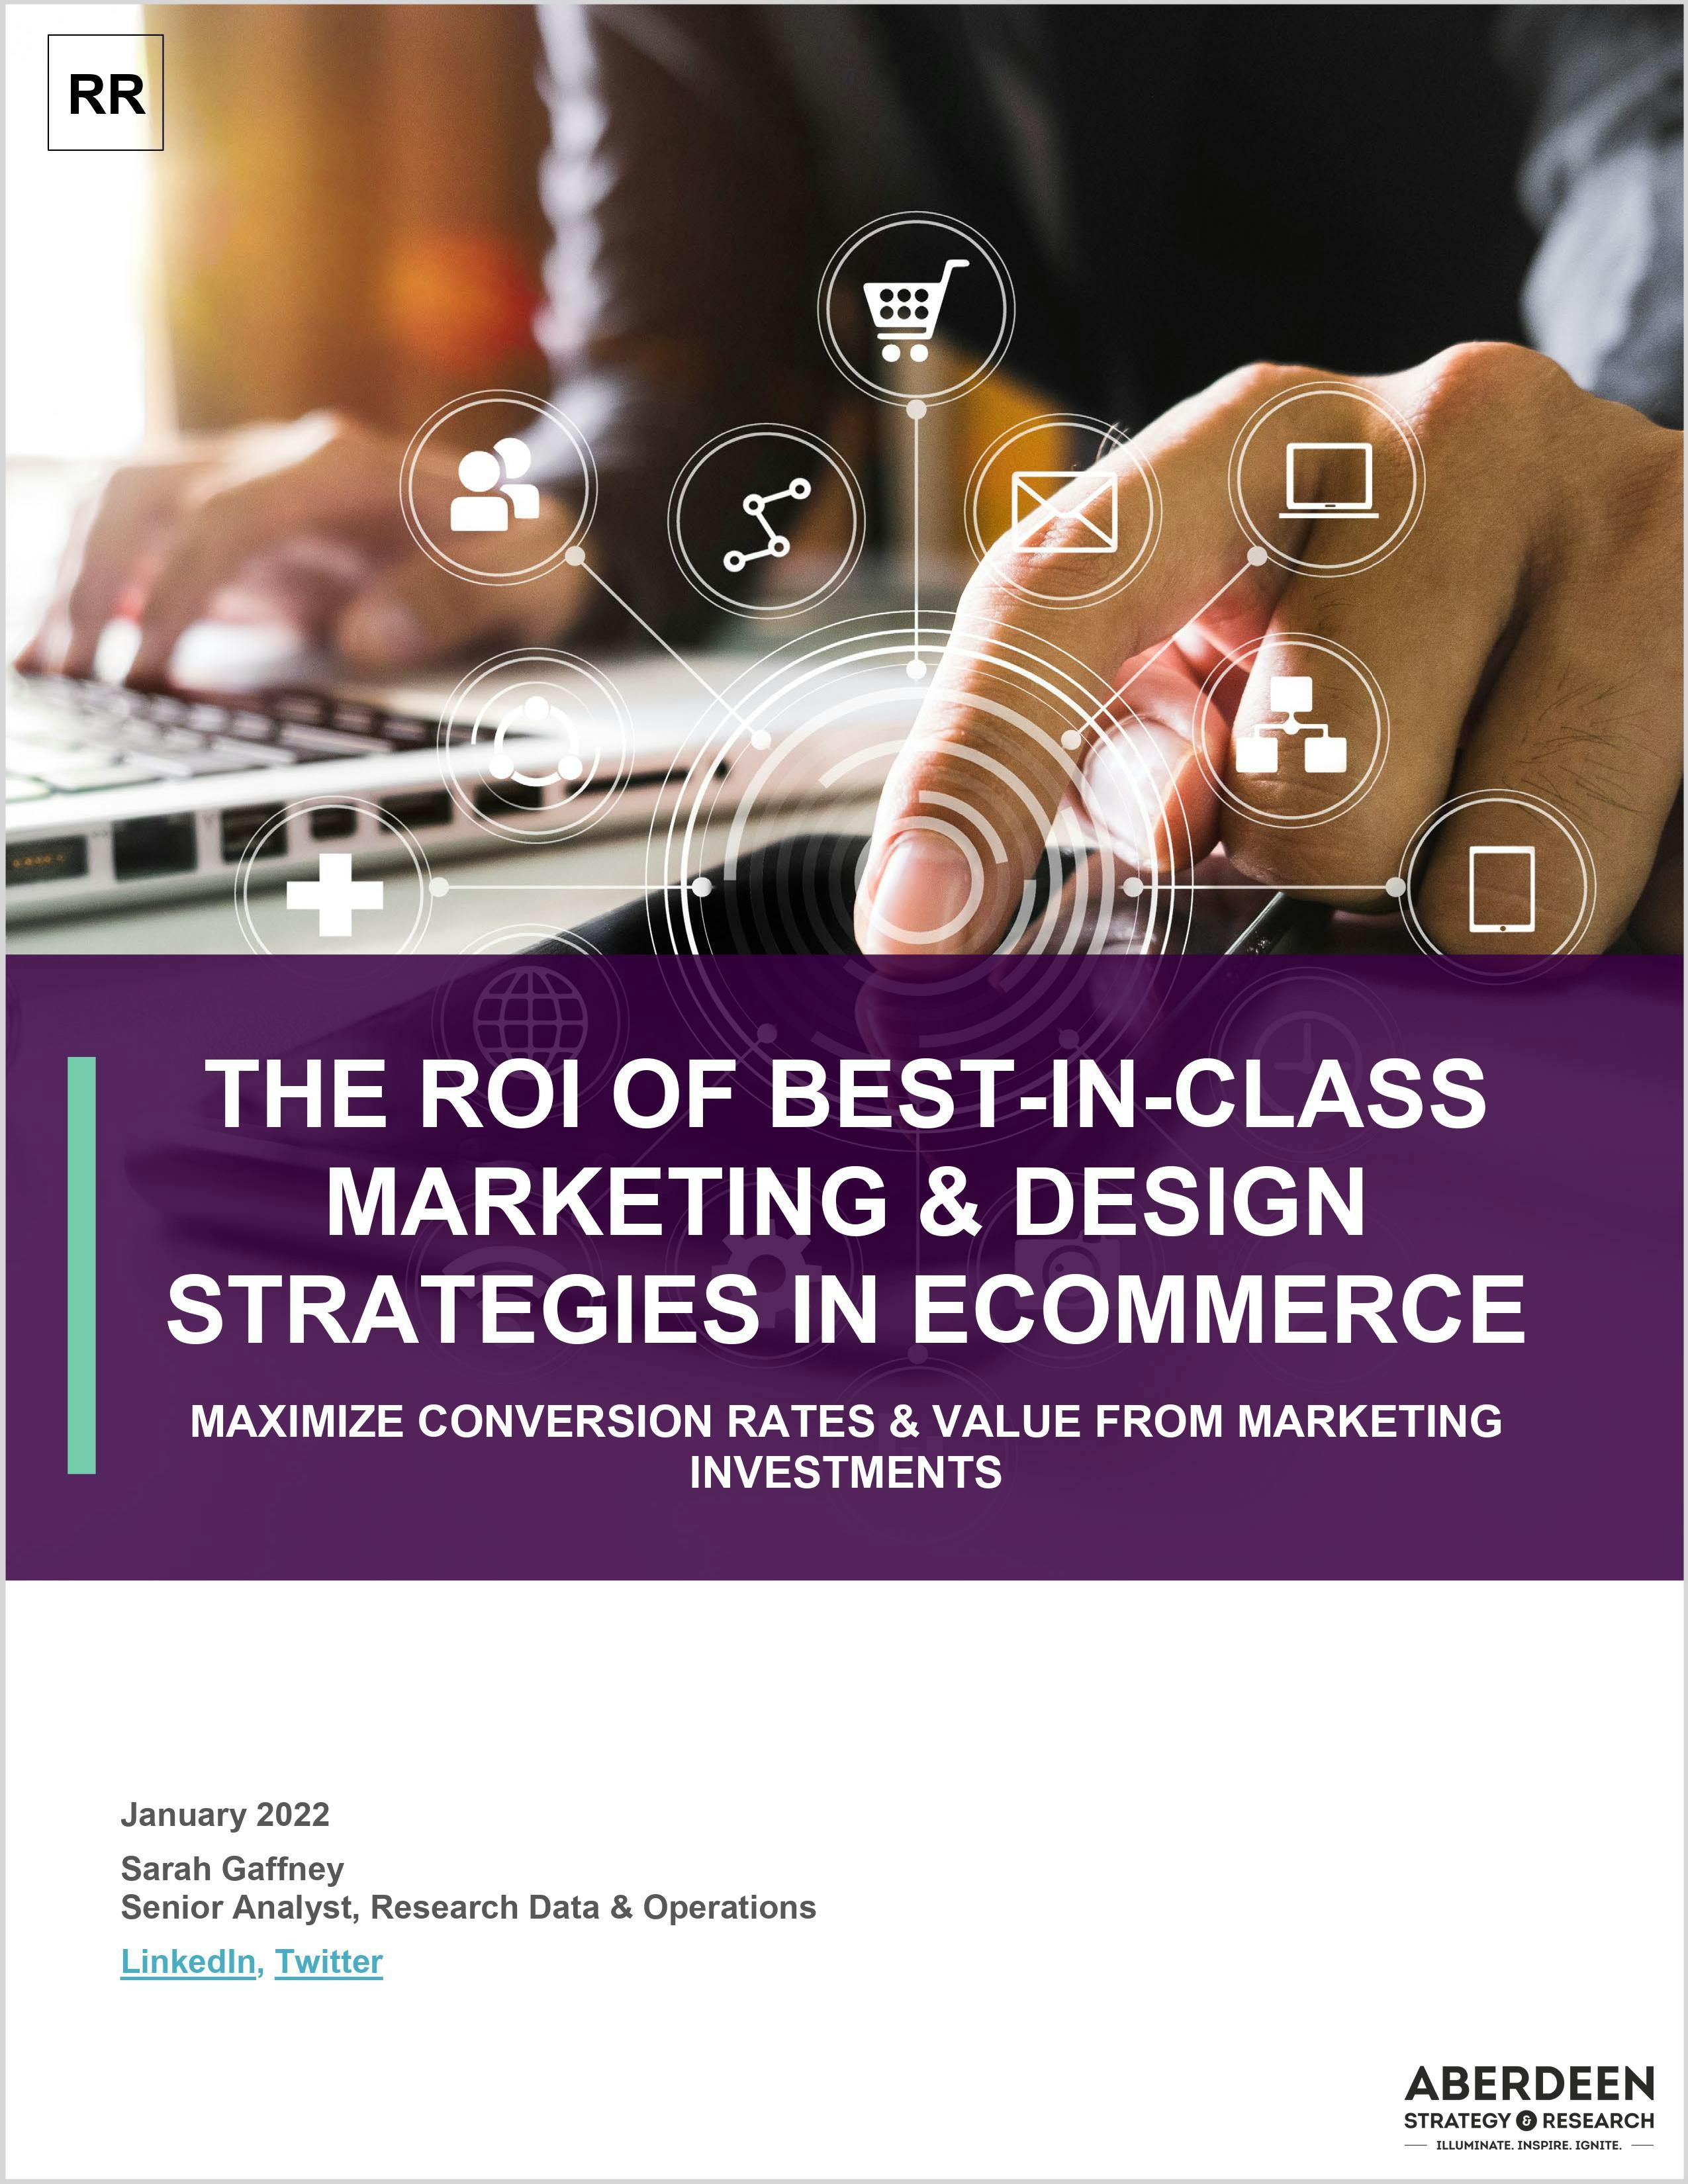 The ROI of Best-in-Class Marketing and Design Strategies for Ecommerce